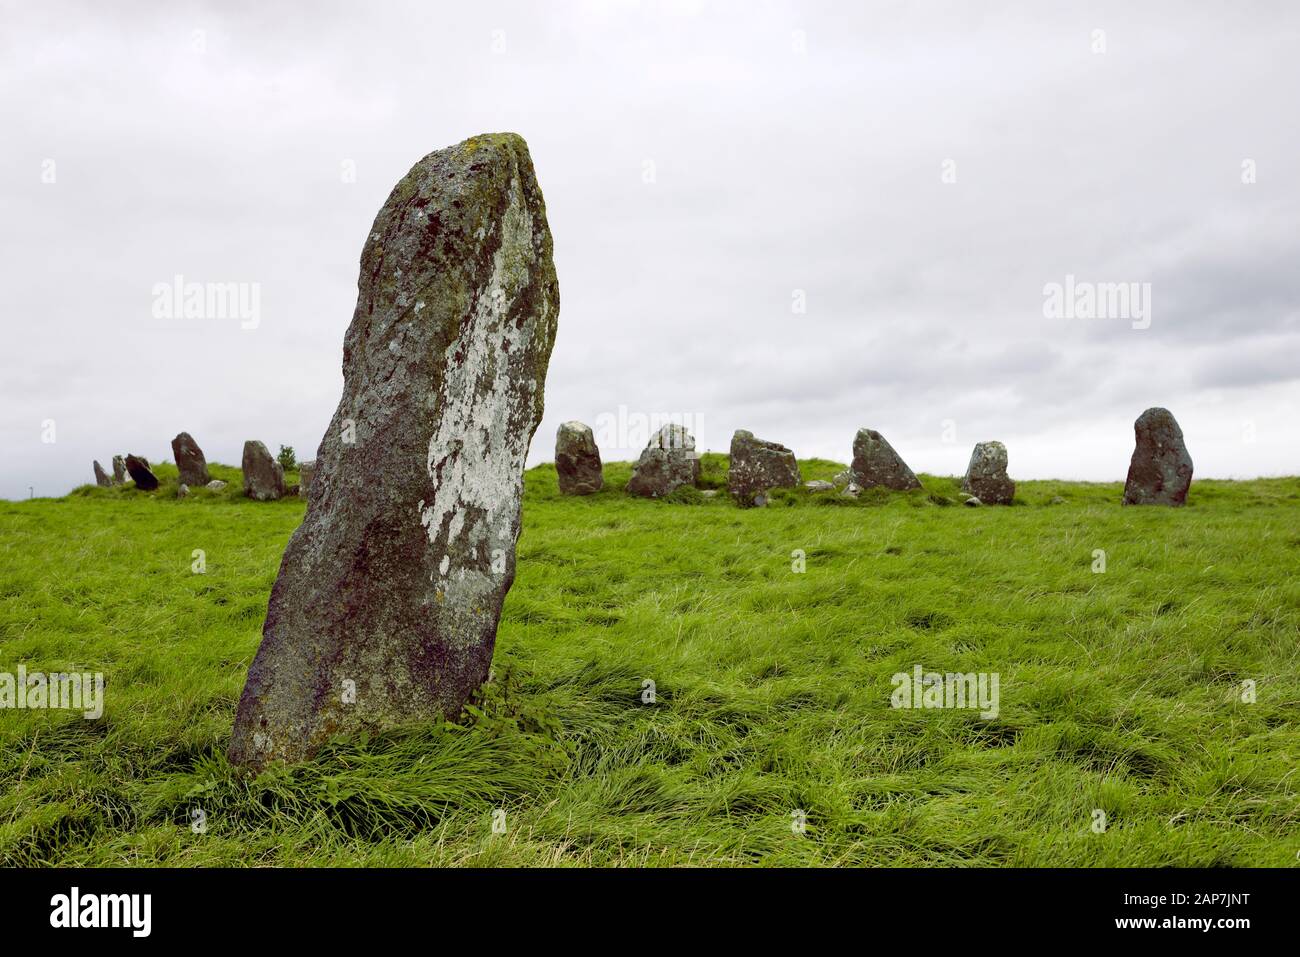 Beltany prehistoric stone circle. Raphoe, Donegal, Ireland. Neolithic and Bronze Age ritual site 2100-700 BC. Outlier with the S.E. quadrant behind Stock Photo